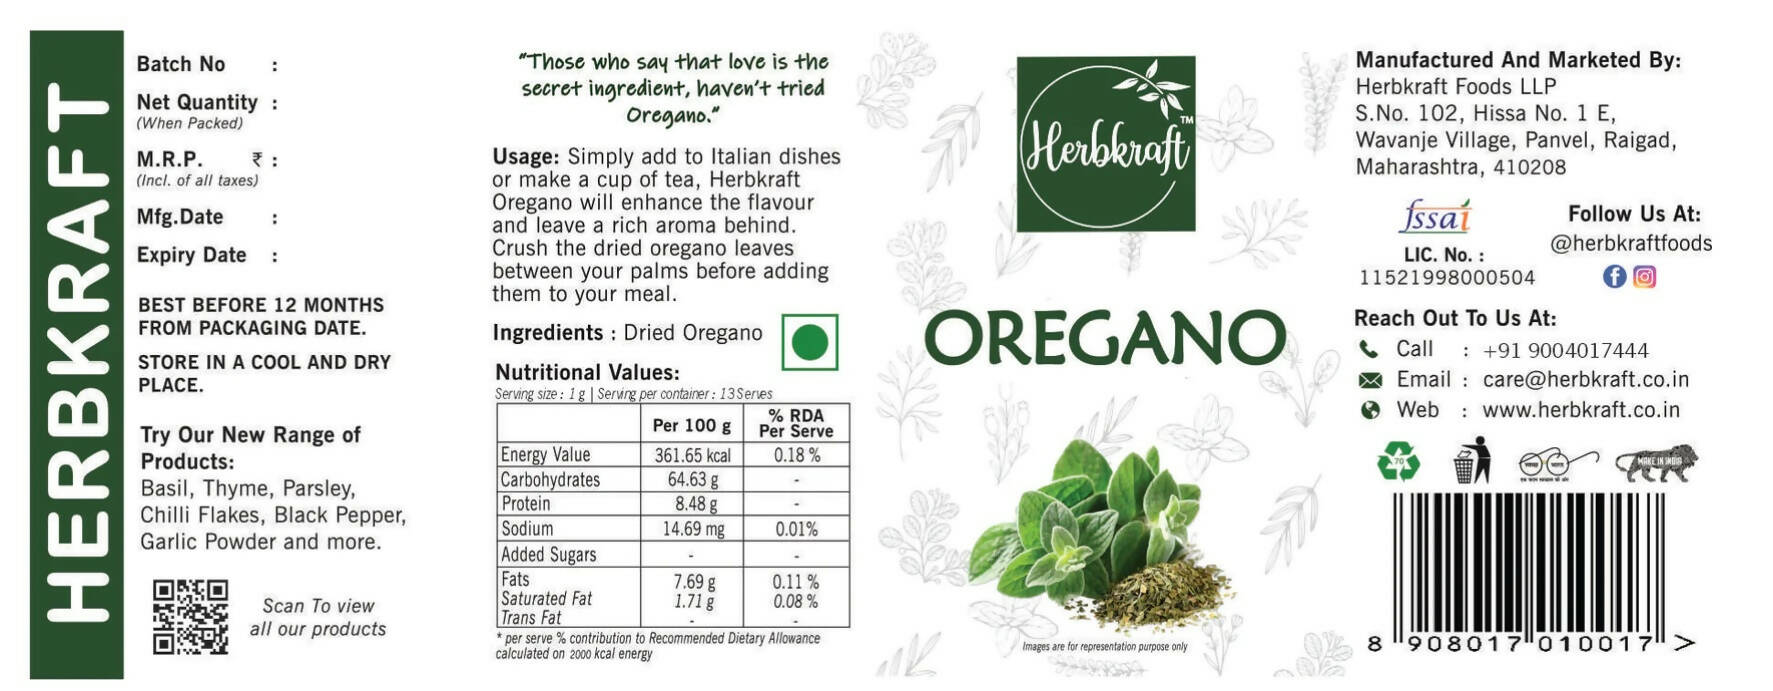 Herbkraft - Oregano 13 GM Pack of 1 | Fresh and Natural Herbs and Seasonings | Dry Leaves | Grocery - Masala - Spices | Vegetable Stir Fry - Pizza - Pasta | No Added Colour and Flavour